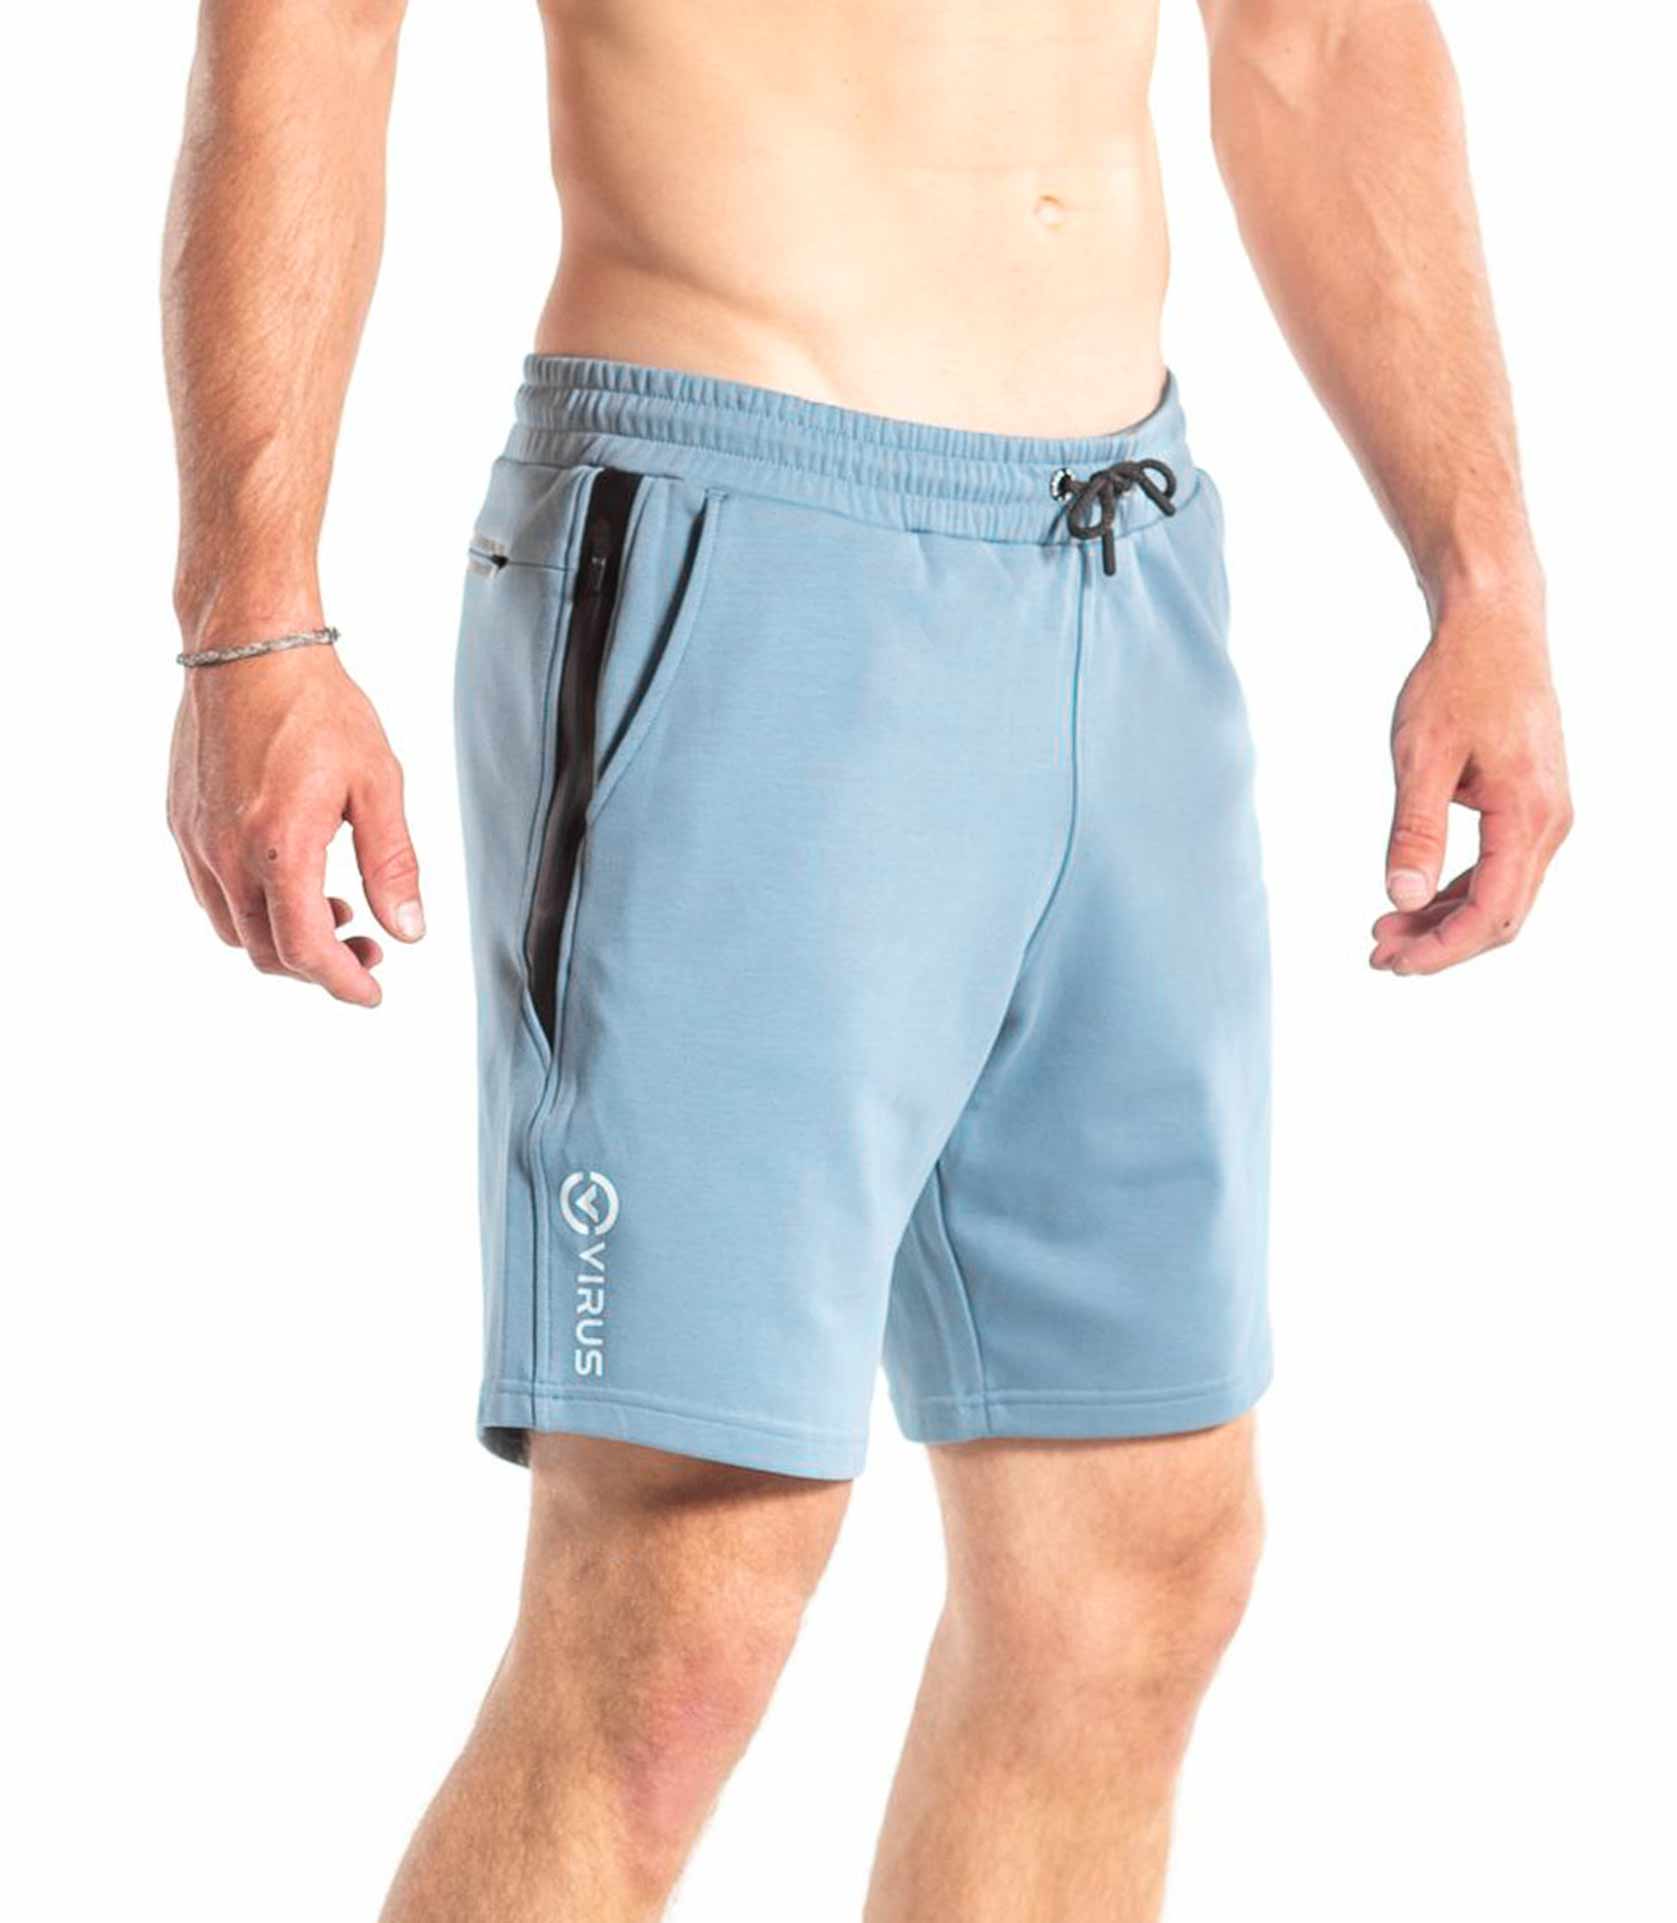 VIRUS on X: Men's Navy, Teal Co23 Compression Tech Shorts.